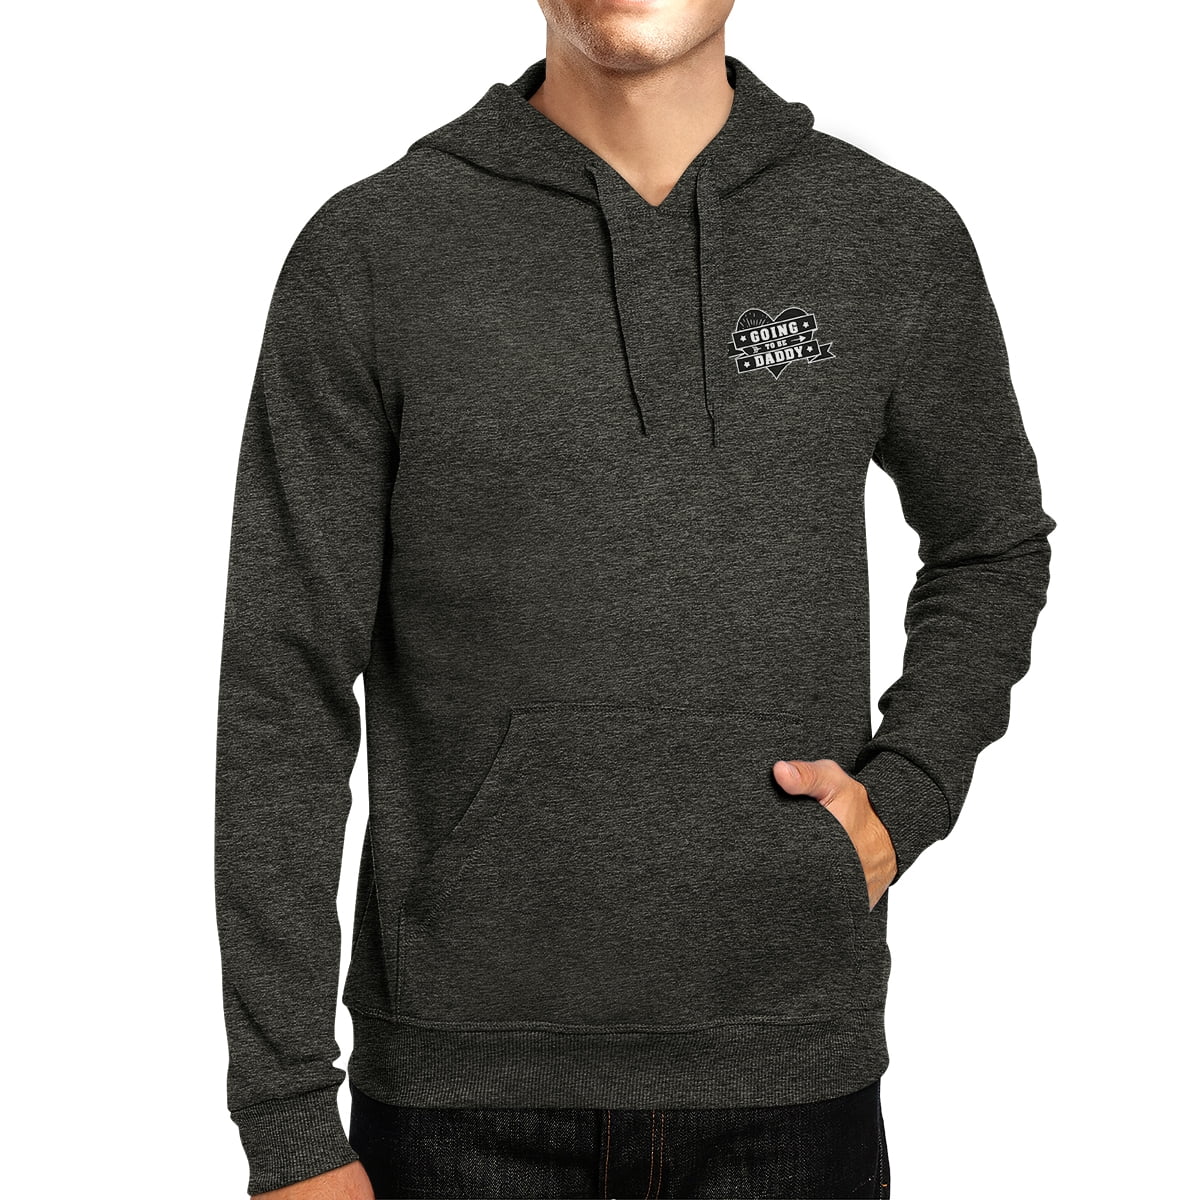 Mens When In Doubt Go Work Out V408 Sleeveless Zipper Hoodie